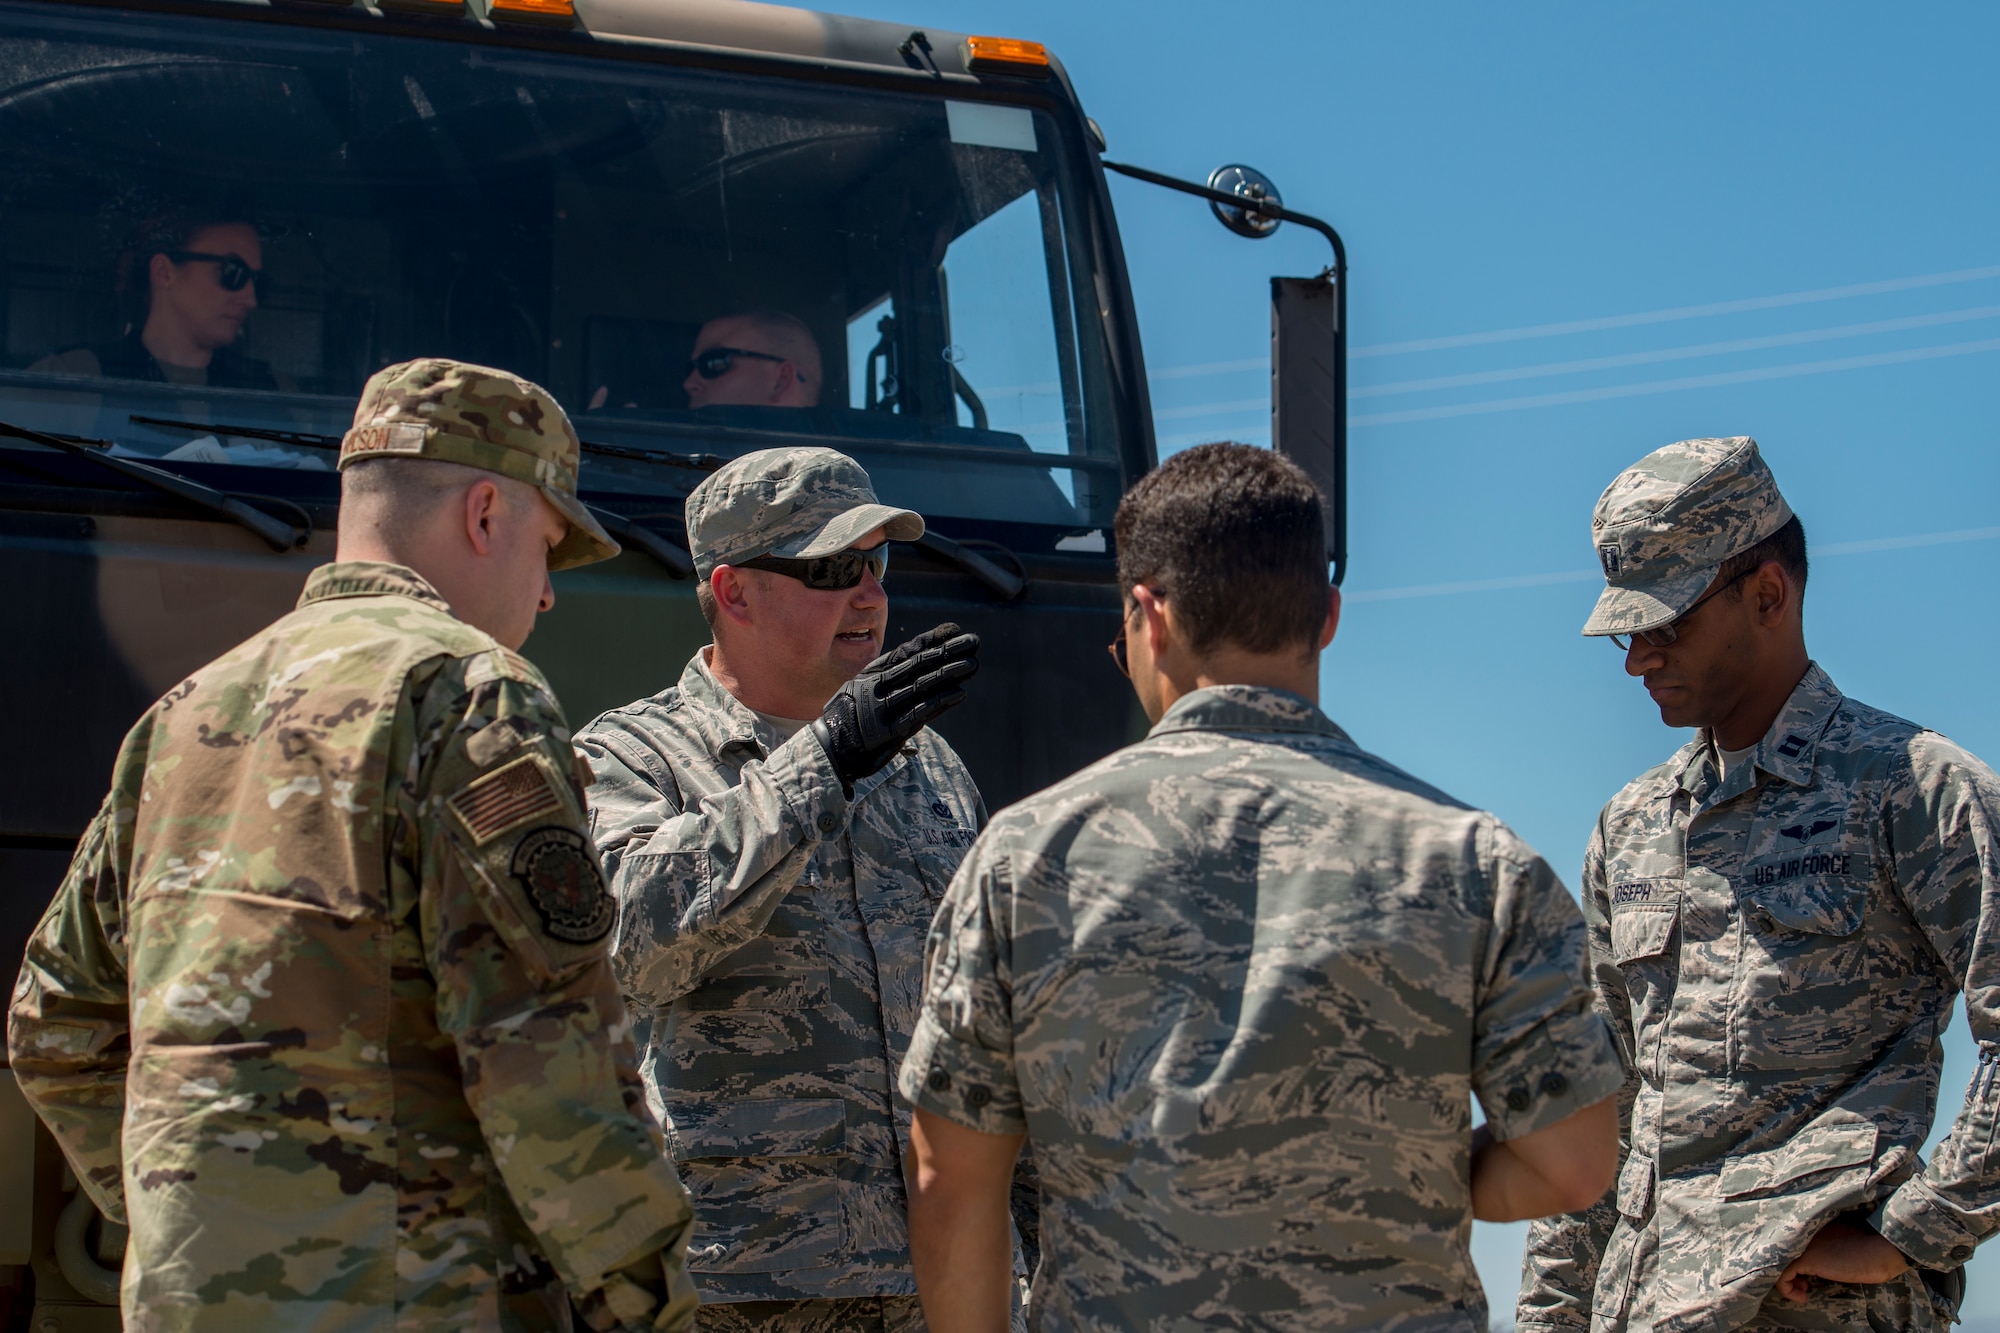 Tech. Sgt. Joshua Kelly, 726th Air Control Squadron NCO in charge of power production, briefs the Mobile Operating Air Base (MOAB) setup to other U.S. Air Force Airmen July 14, 2019, at Mountain Home Air Force Base, Idaho. This convoy was in support of Hardrock Exercise 19-2, where supplies on the truck enabled the 726th ACS Airmen to set up an entirely self-sufficient base in a simulated remote location. (U.S. Air Force photo by Senior Airman JaNae Capuno)